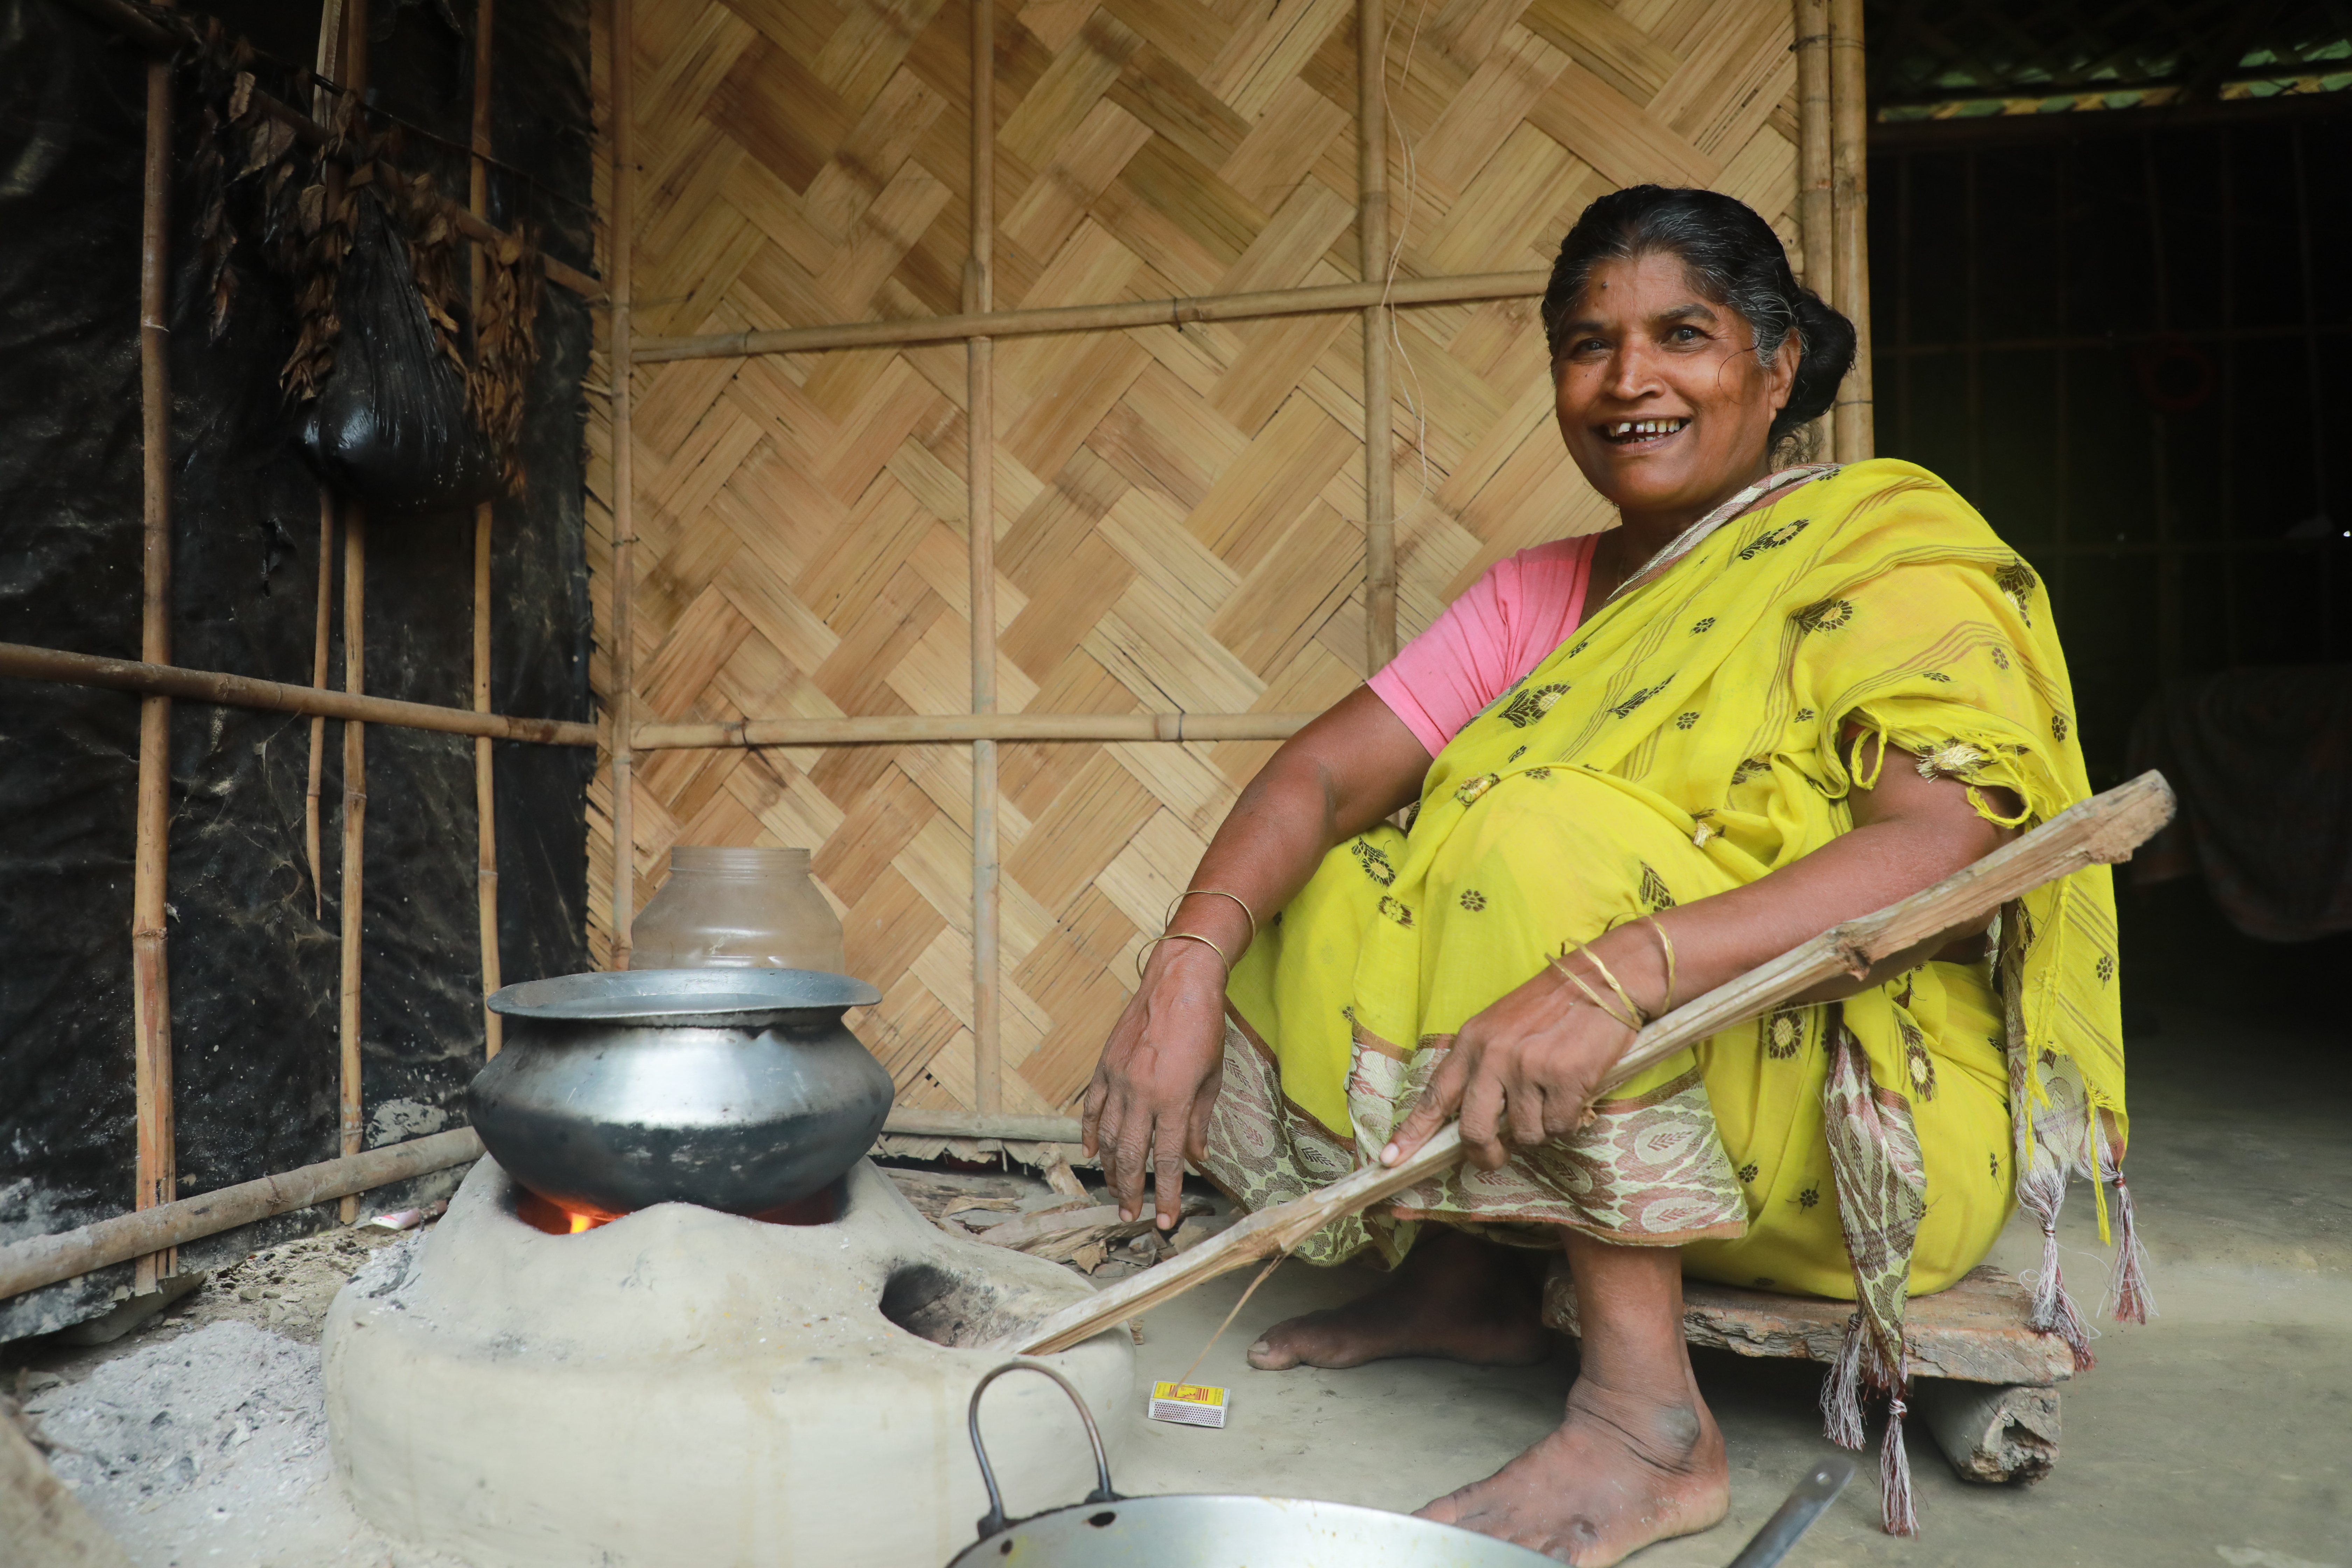 Savitri in her kitchen sitting by a stove made of mud.